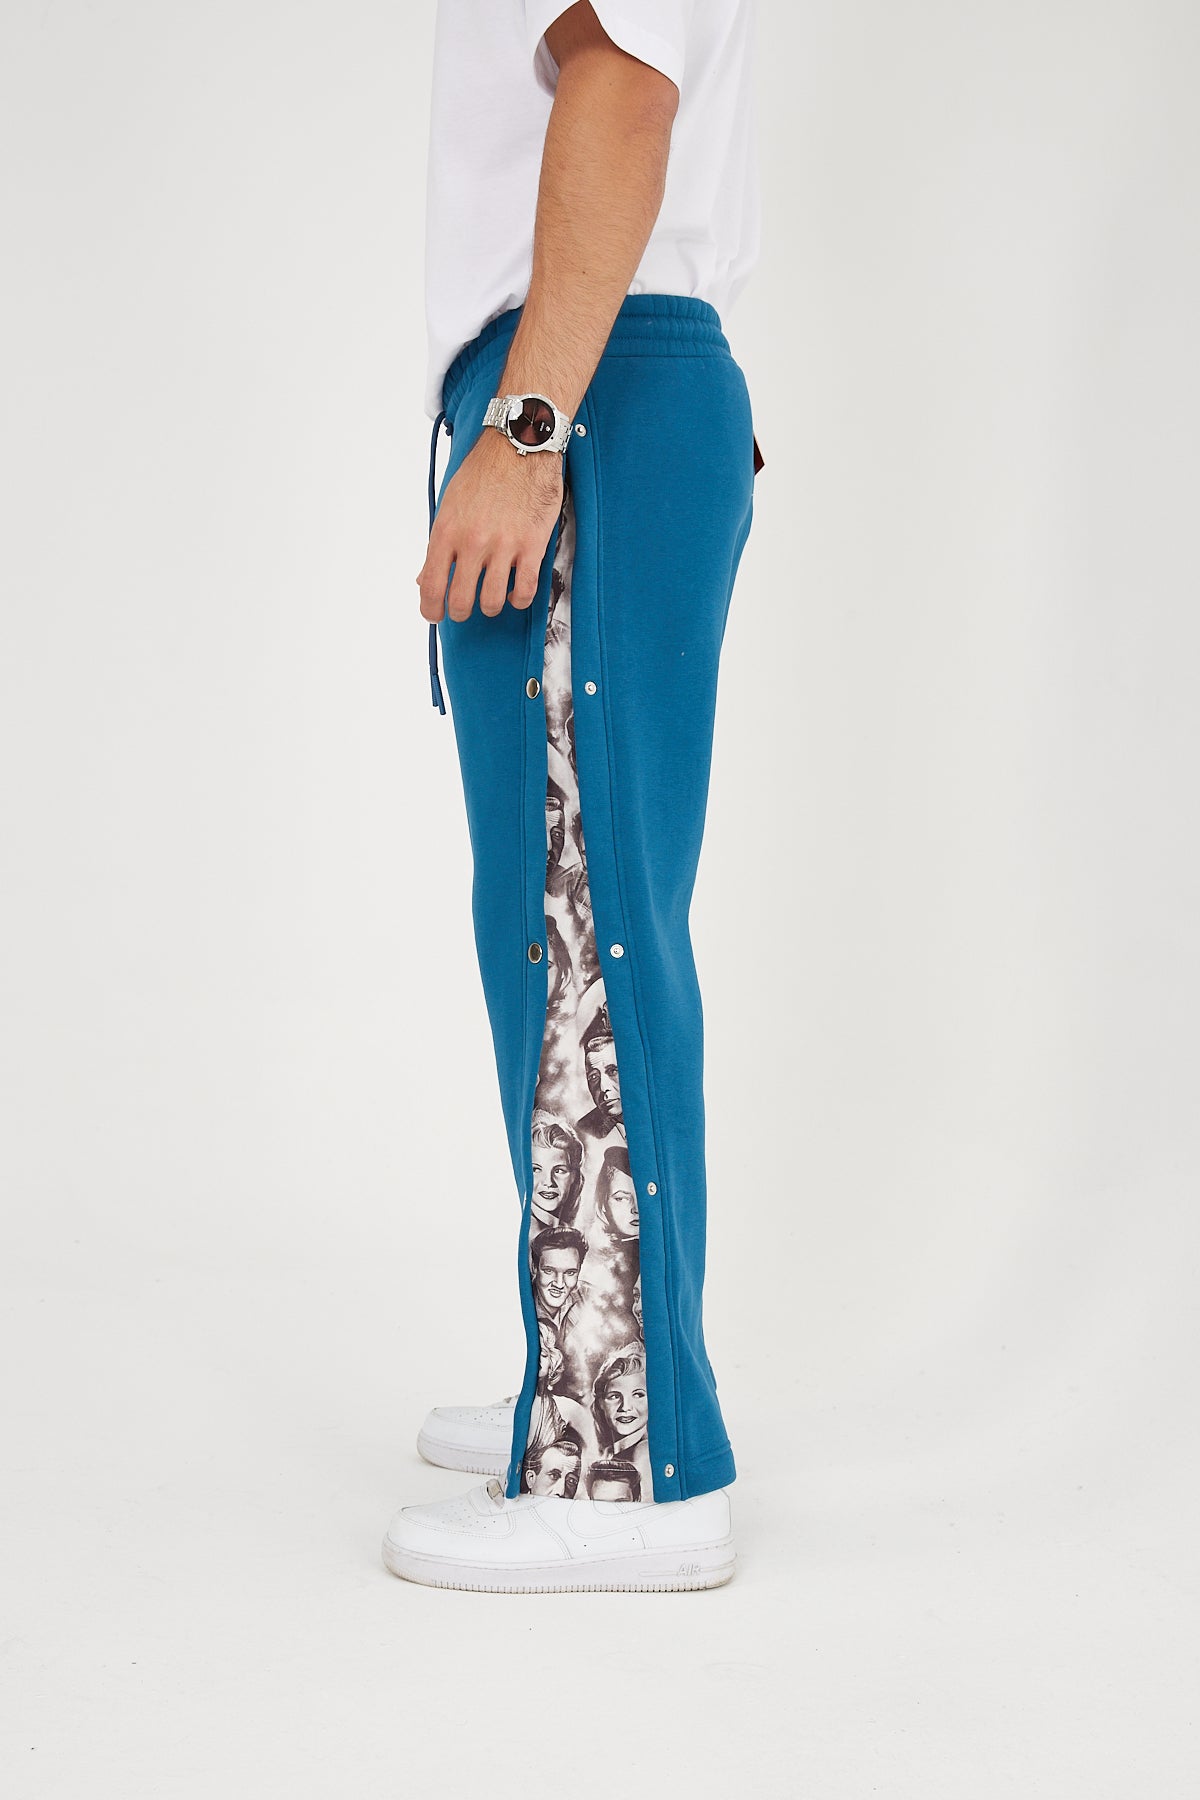 SWEATPANTS - THE ICONS OF THE 60s - BLUE